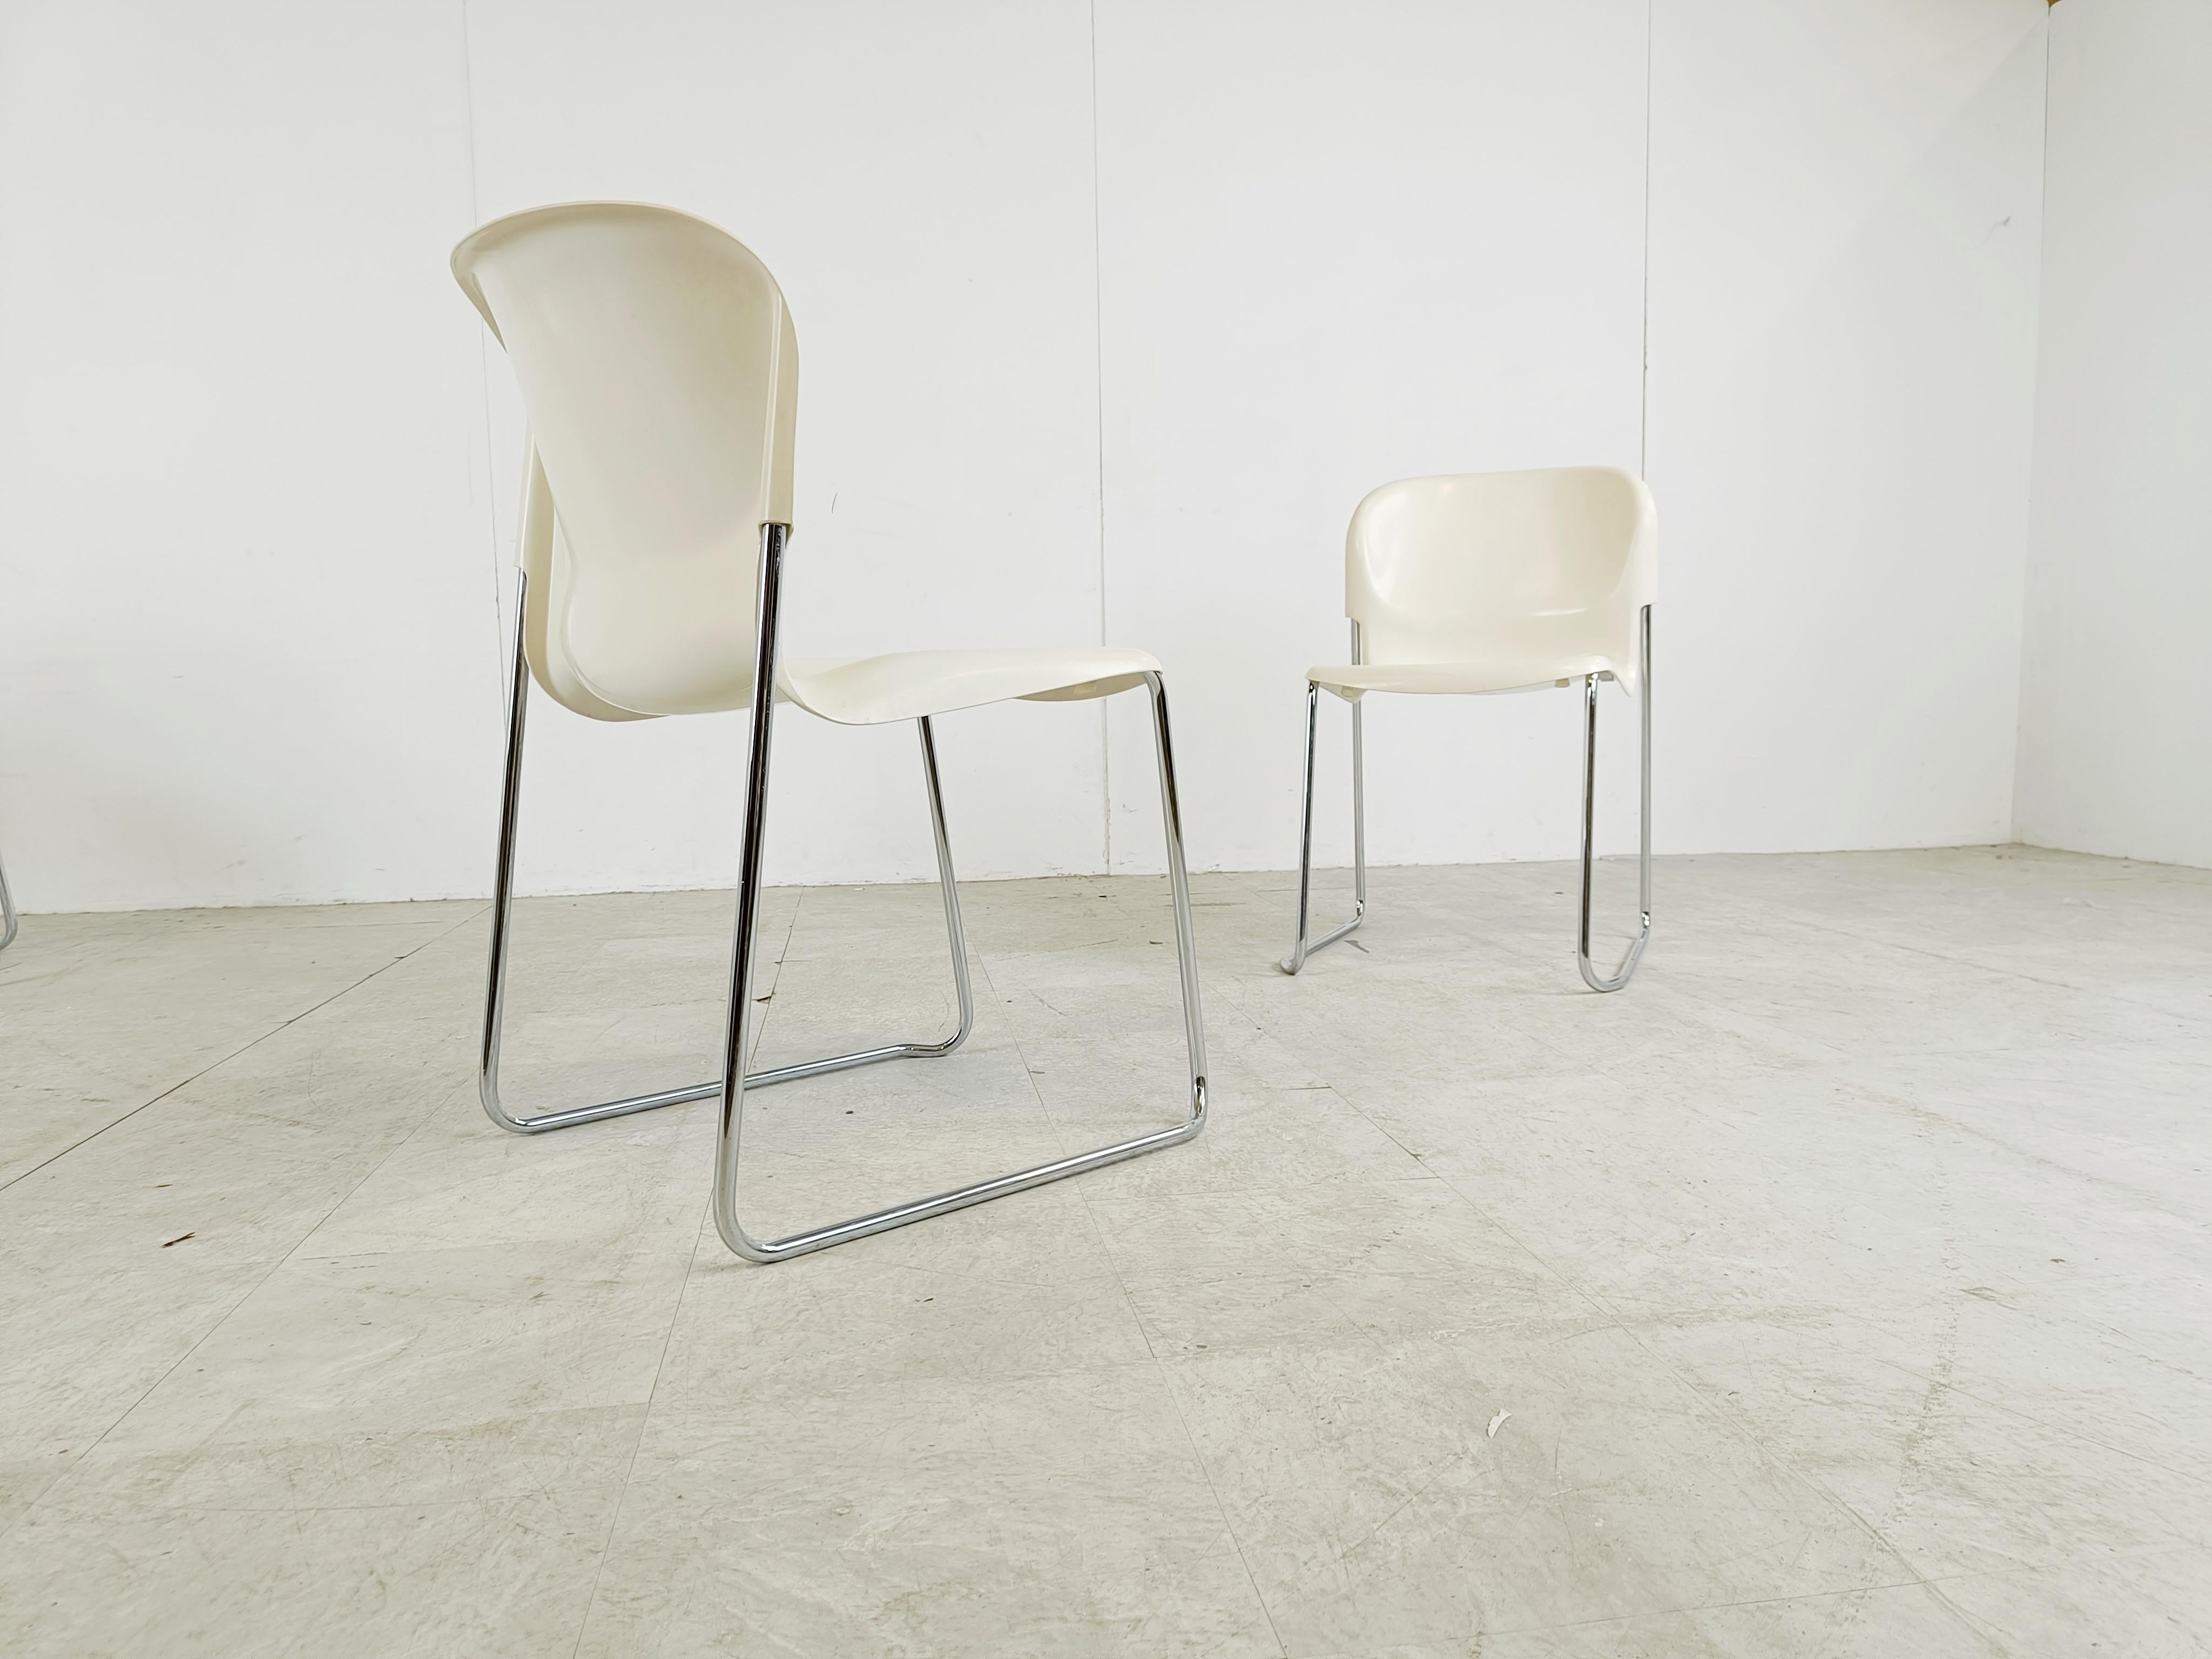 Vintage Drabert SM400 stacking chairs by Gerd Lange, 1980s For Sale 2